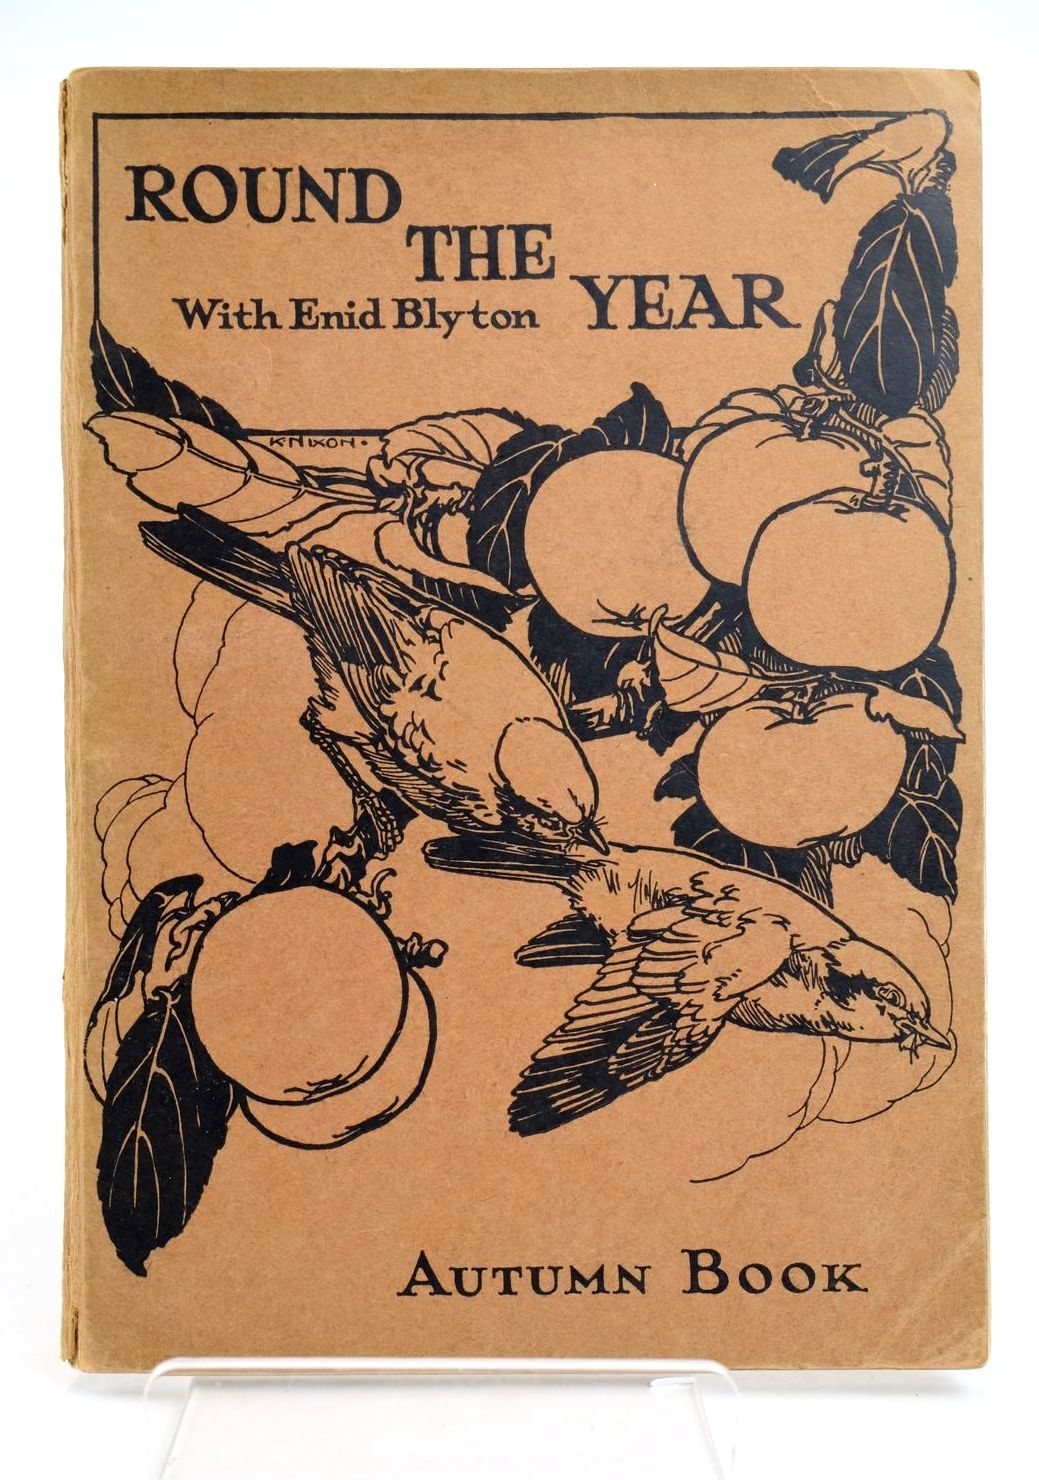 Photo of ROUND THE YEAR WITH ENID BLYTON - AUTUMN BOOK written by Blyton, Enid published by Evans Brothers Limited (STOCK CODE: 1318797)  for sale by Stella & Rose's Books